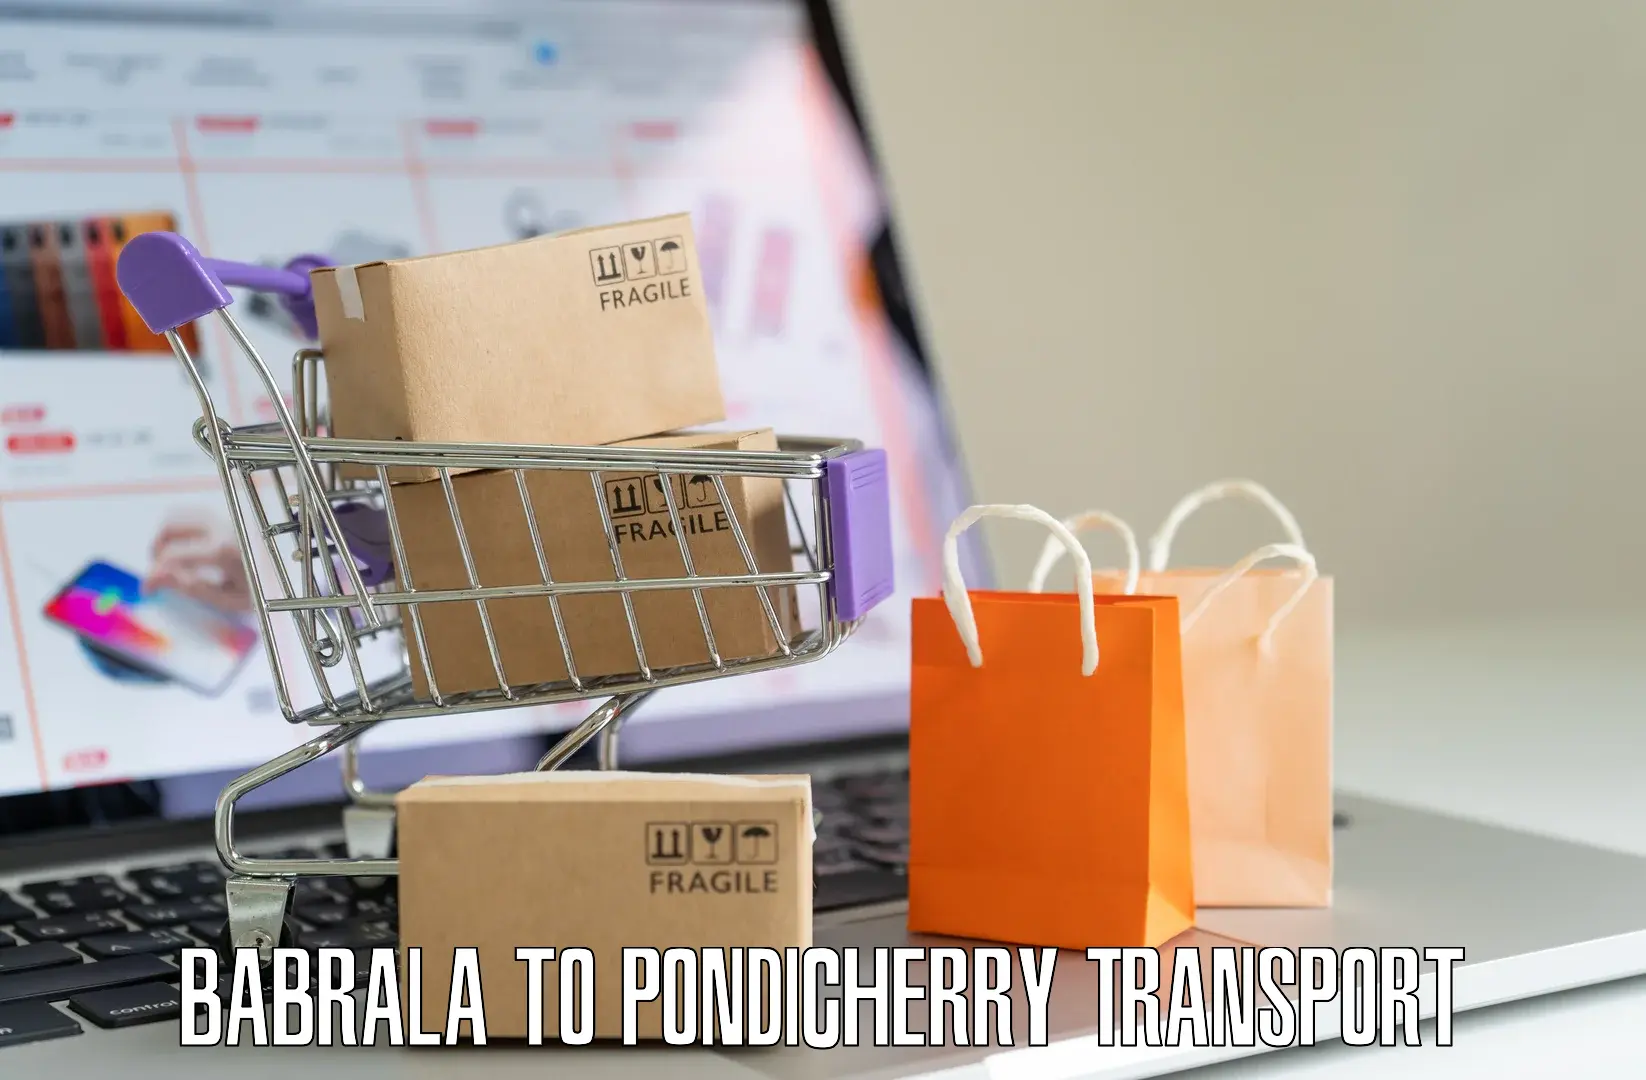 Express transport services in Babrala to Pondicherry